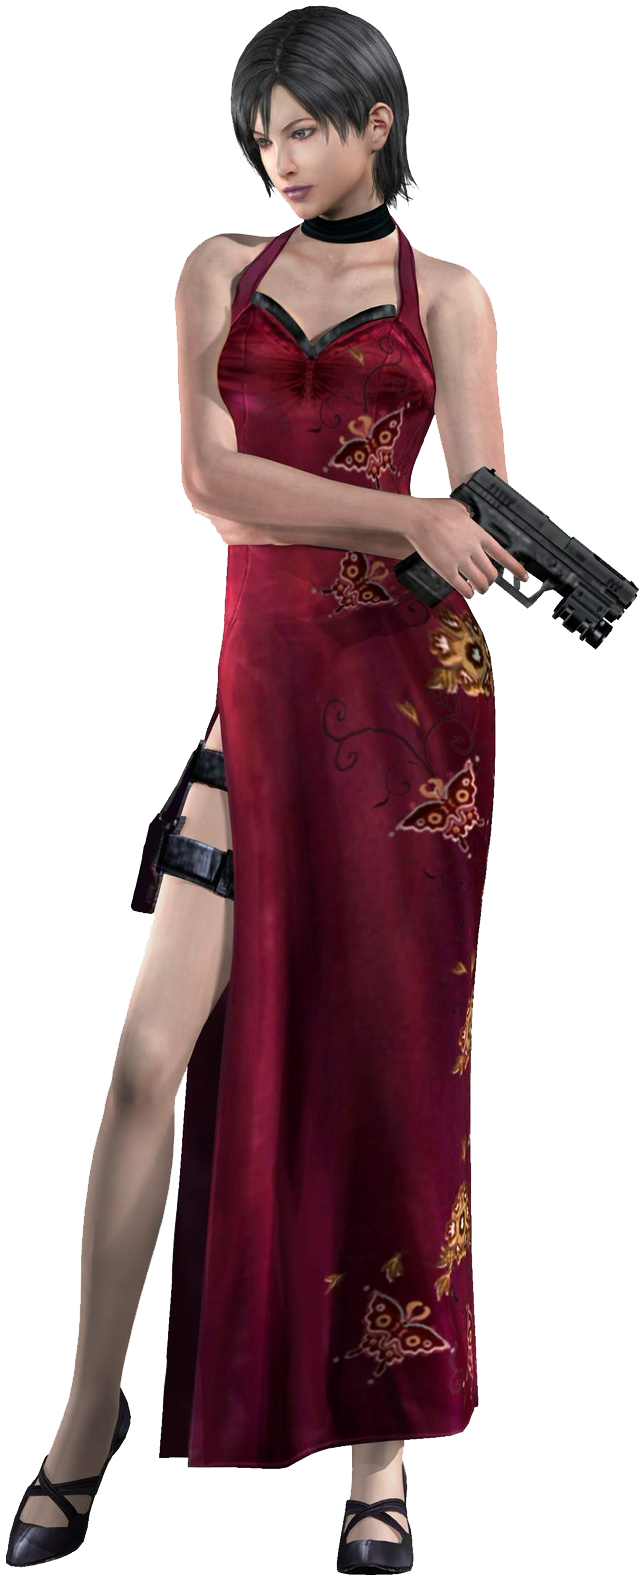 avignette_wikia_nocookie_net_residentevil_images_3_3a_Ada1_png9ac30be71269cb0ce598571235f8df72.png